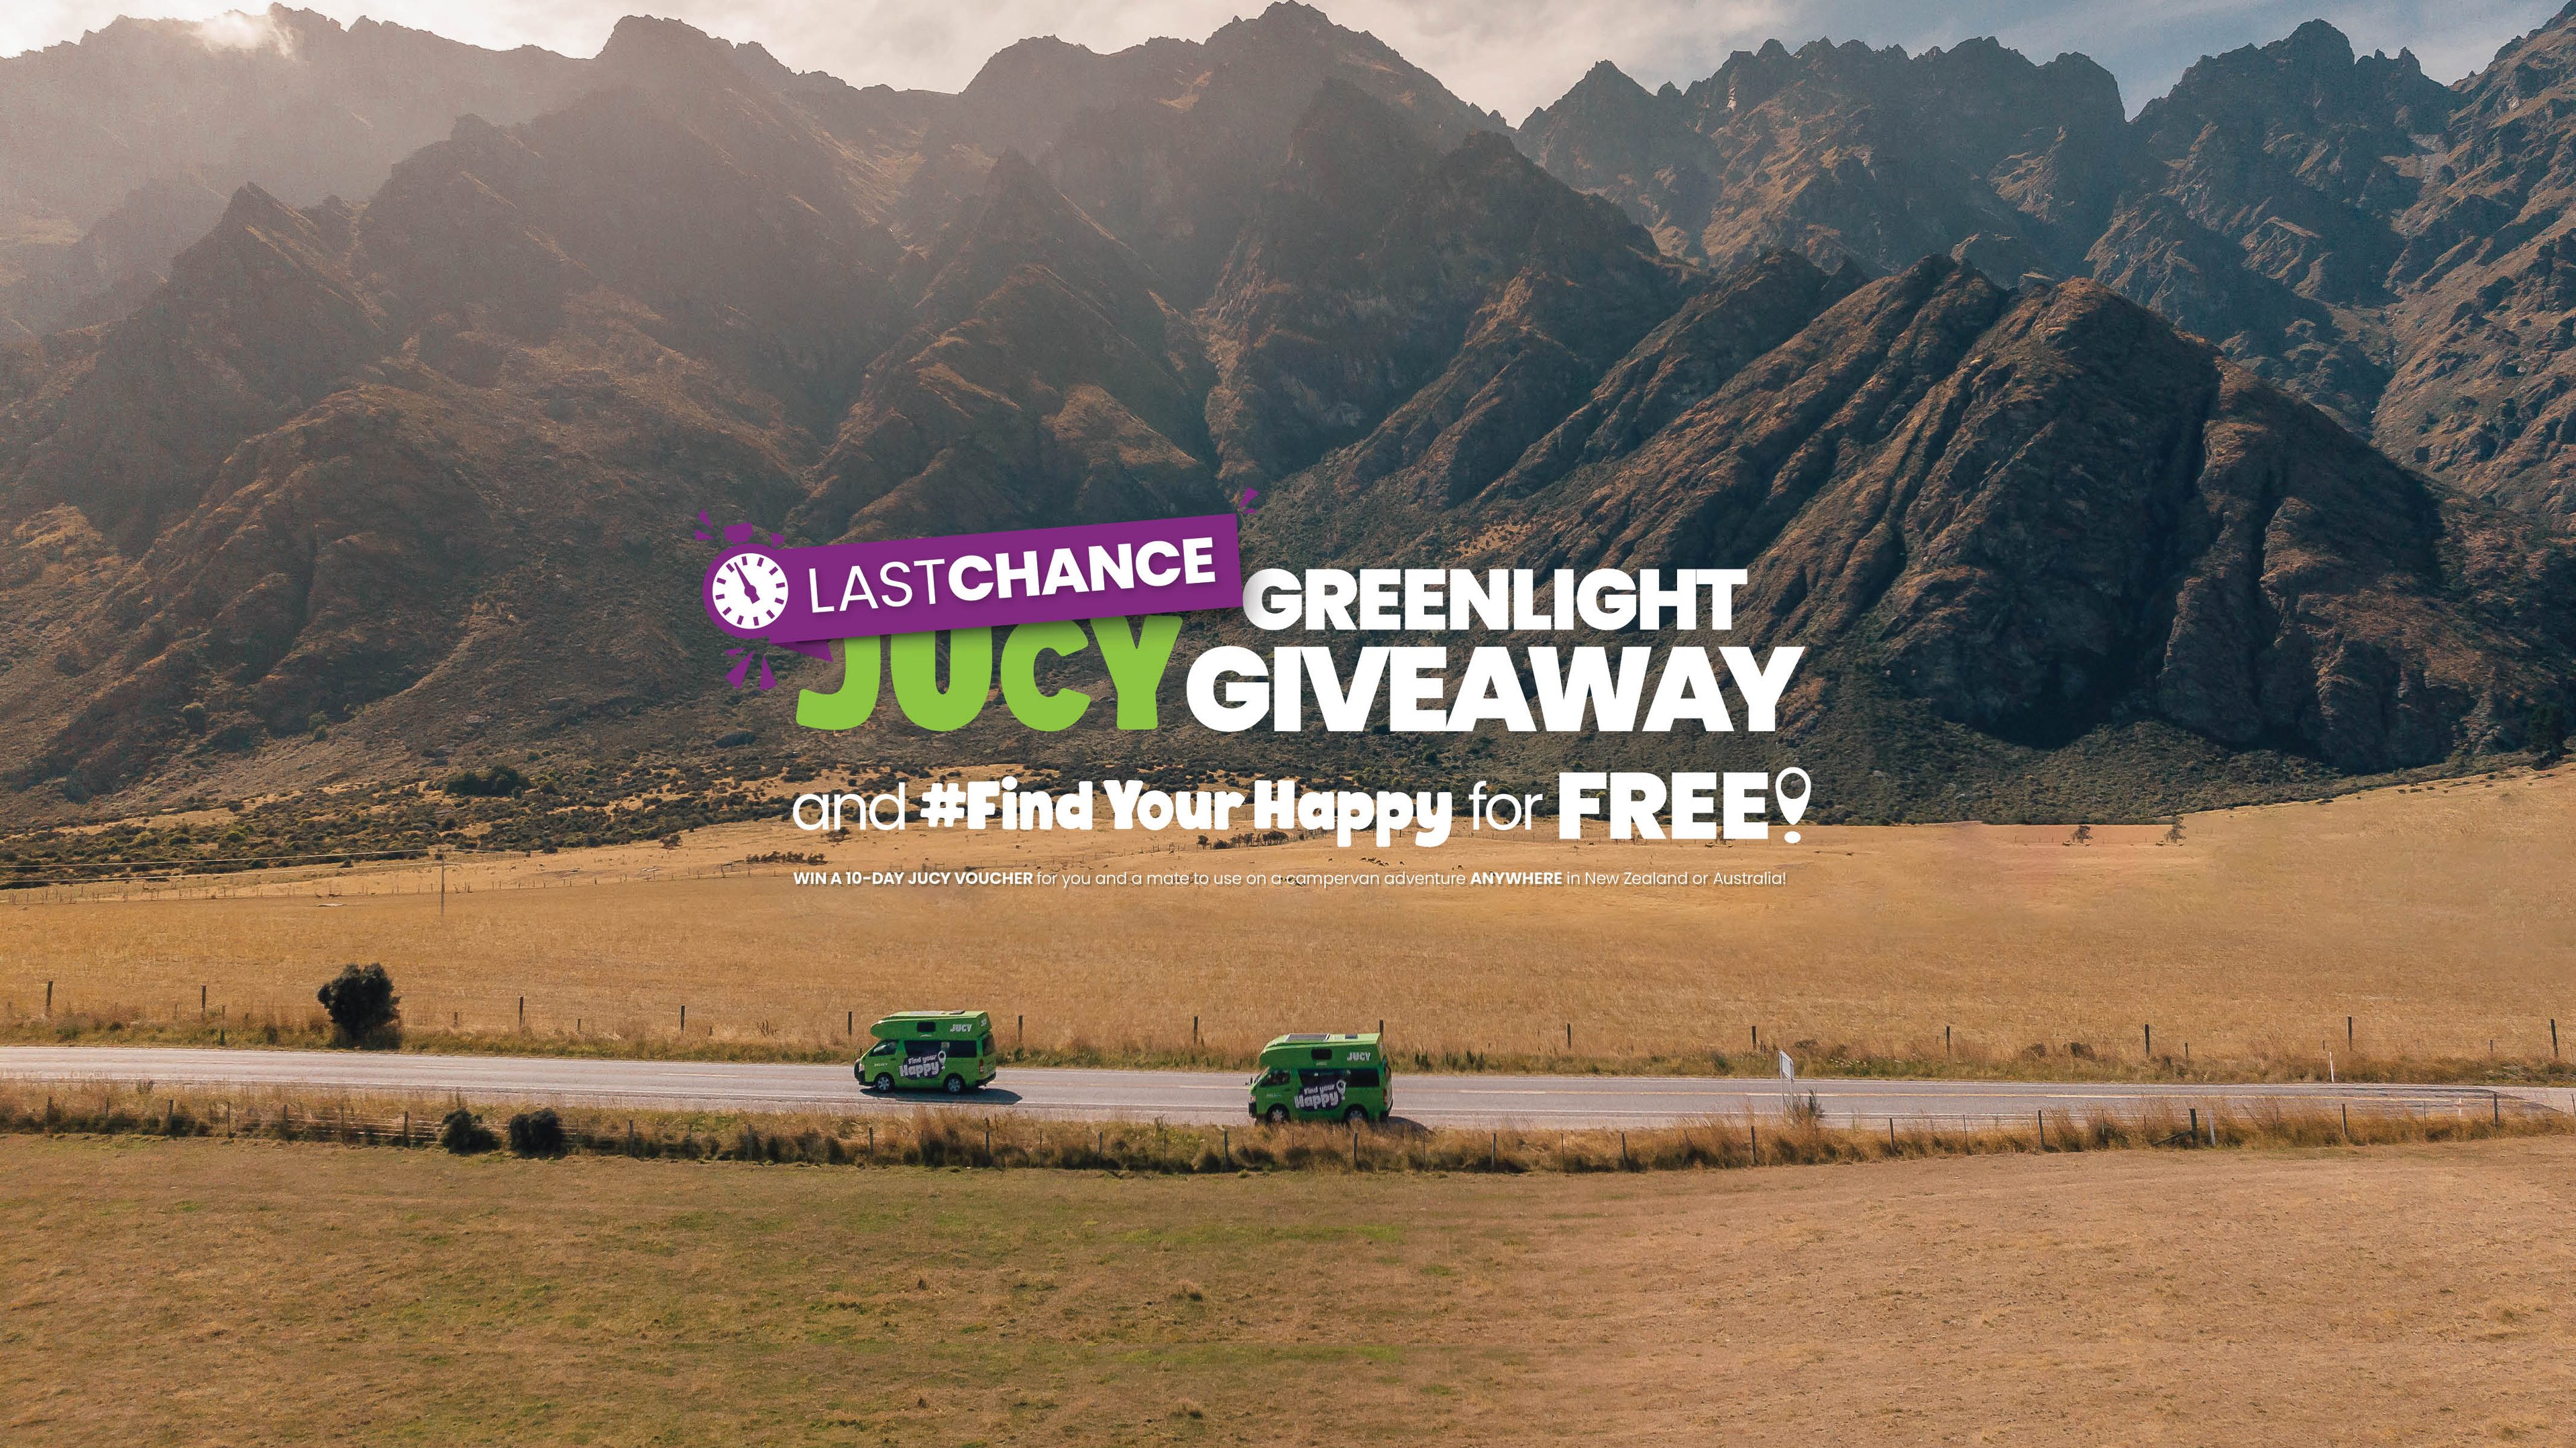 2023071 Last Chance Greenlight Giveaway YouTube Banner 2048 x 1152 v3